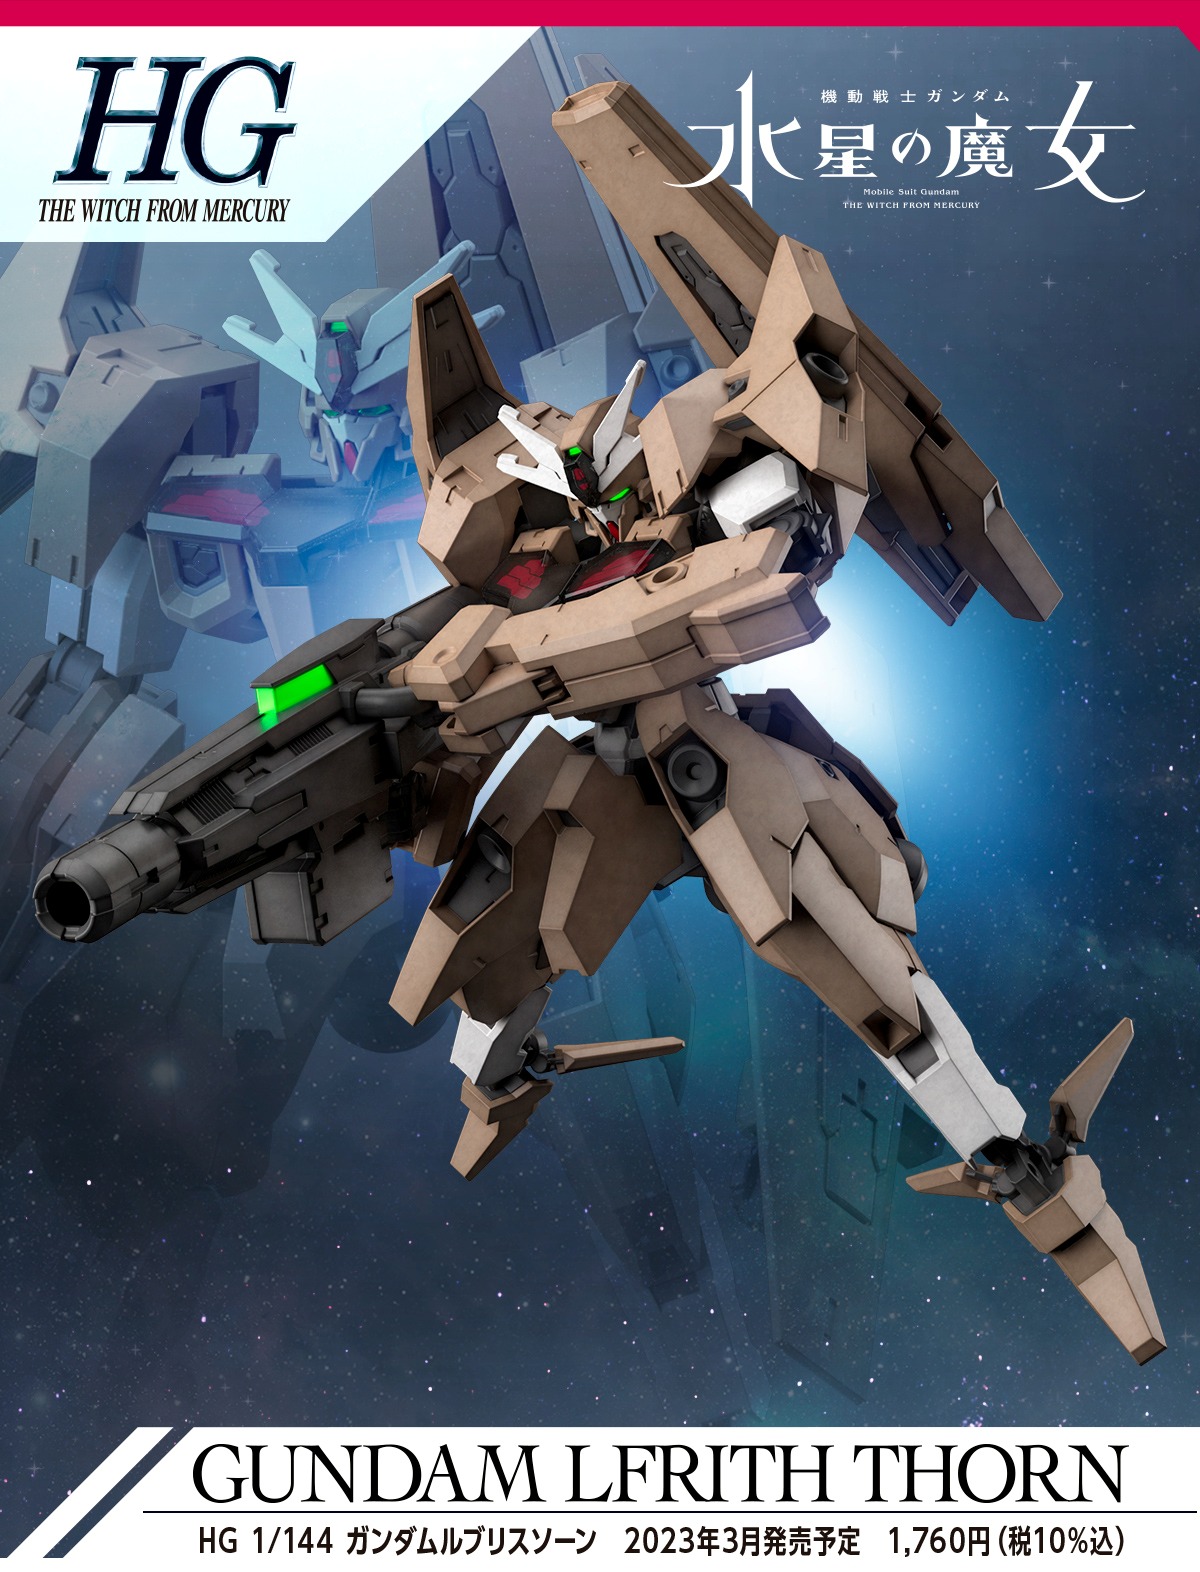 PRE-ORDER: May 2023) Bandai Hobby The Witch From Mercury Gundam